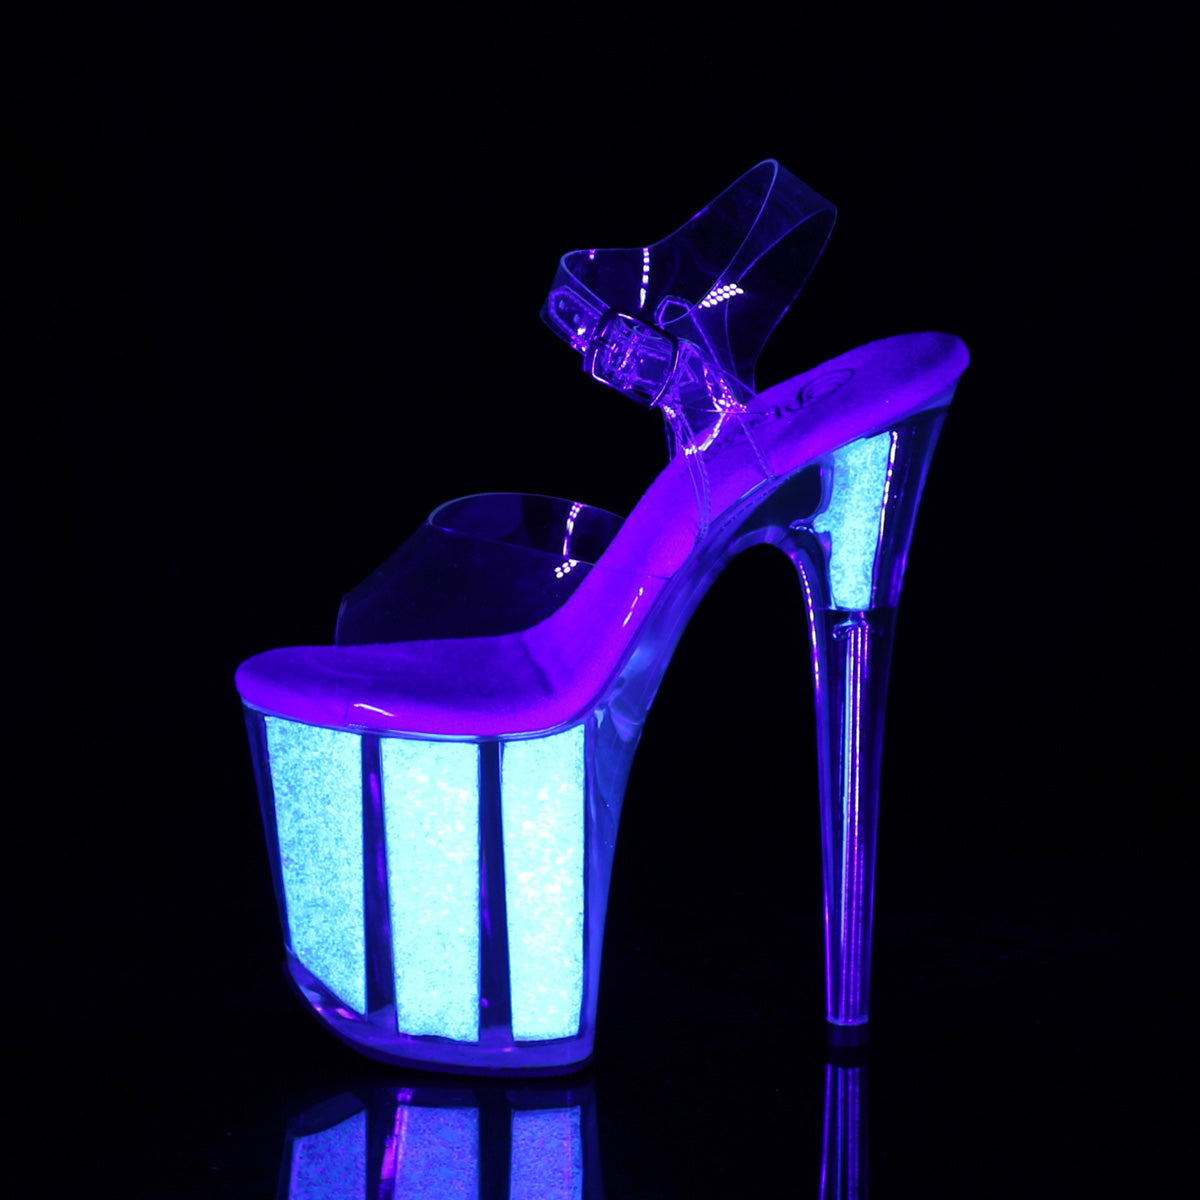 FLAMINGO-808UVG 8" Heel Clear Neon Glitter Strippers Shoes-Pleaser- Sexy Shoes Pole Dance Heels